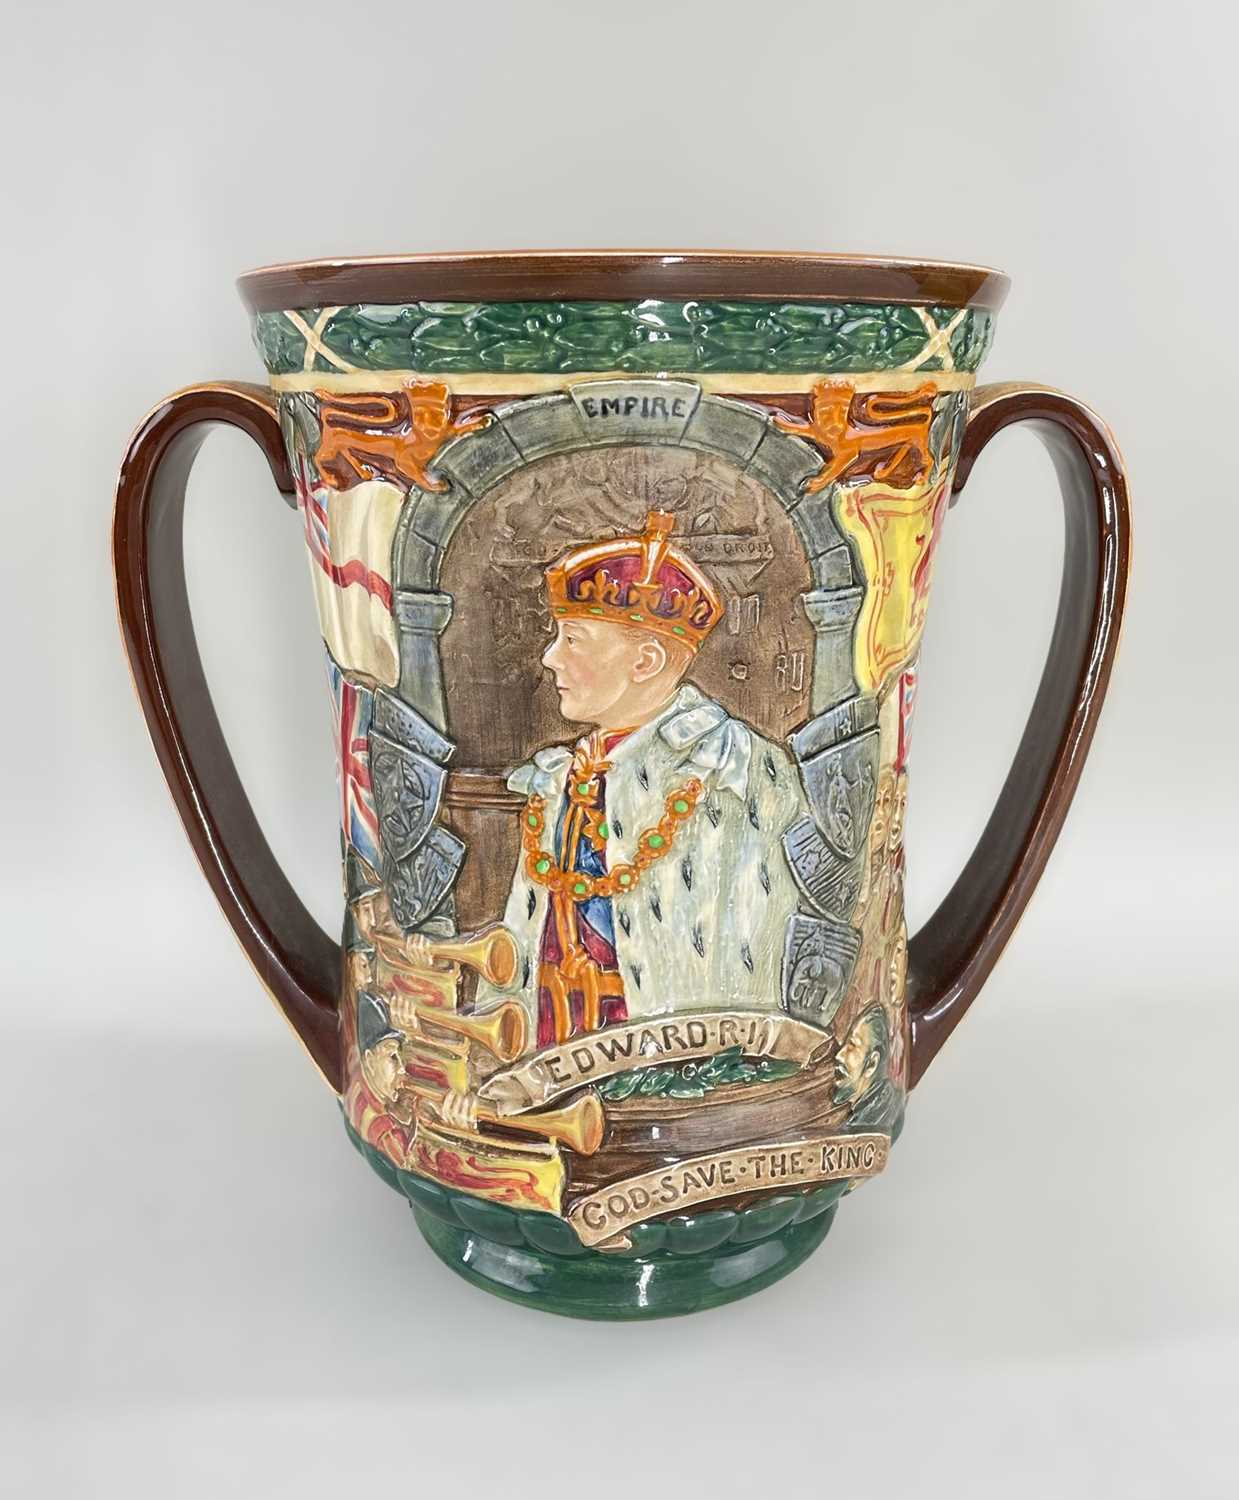 ROYAL DOULTON LOVING CUP, commemorating the Coronation of Edward VIII, limited edition 351/2000,